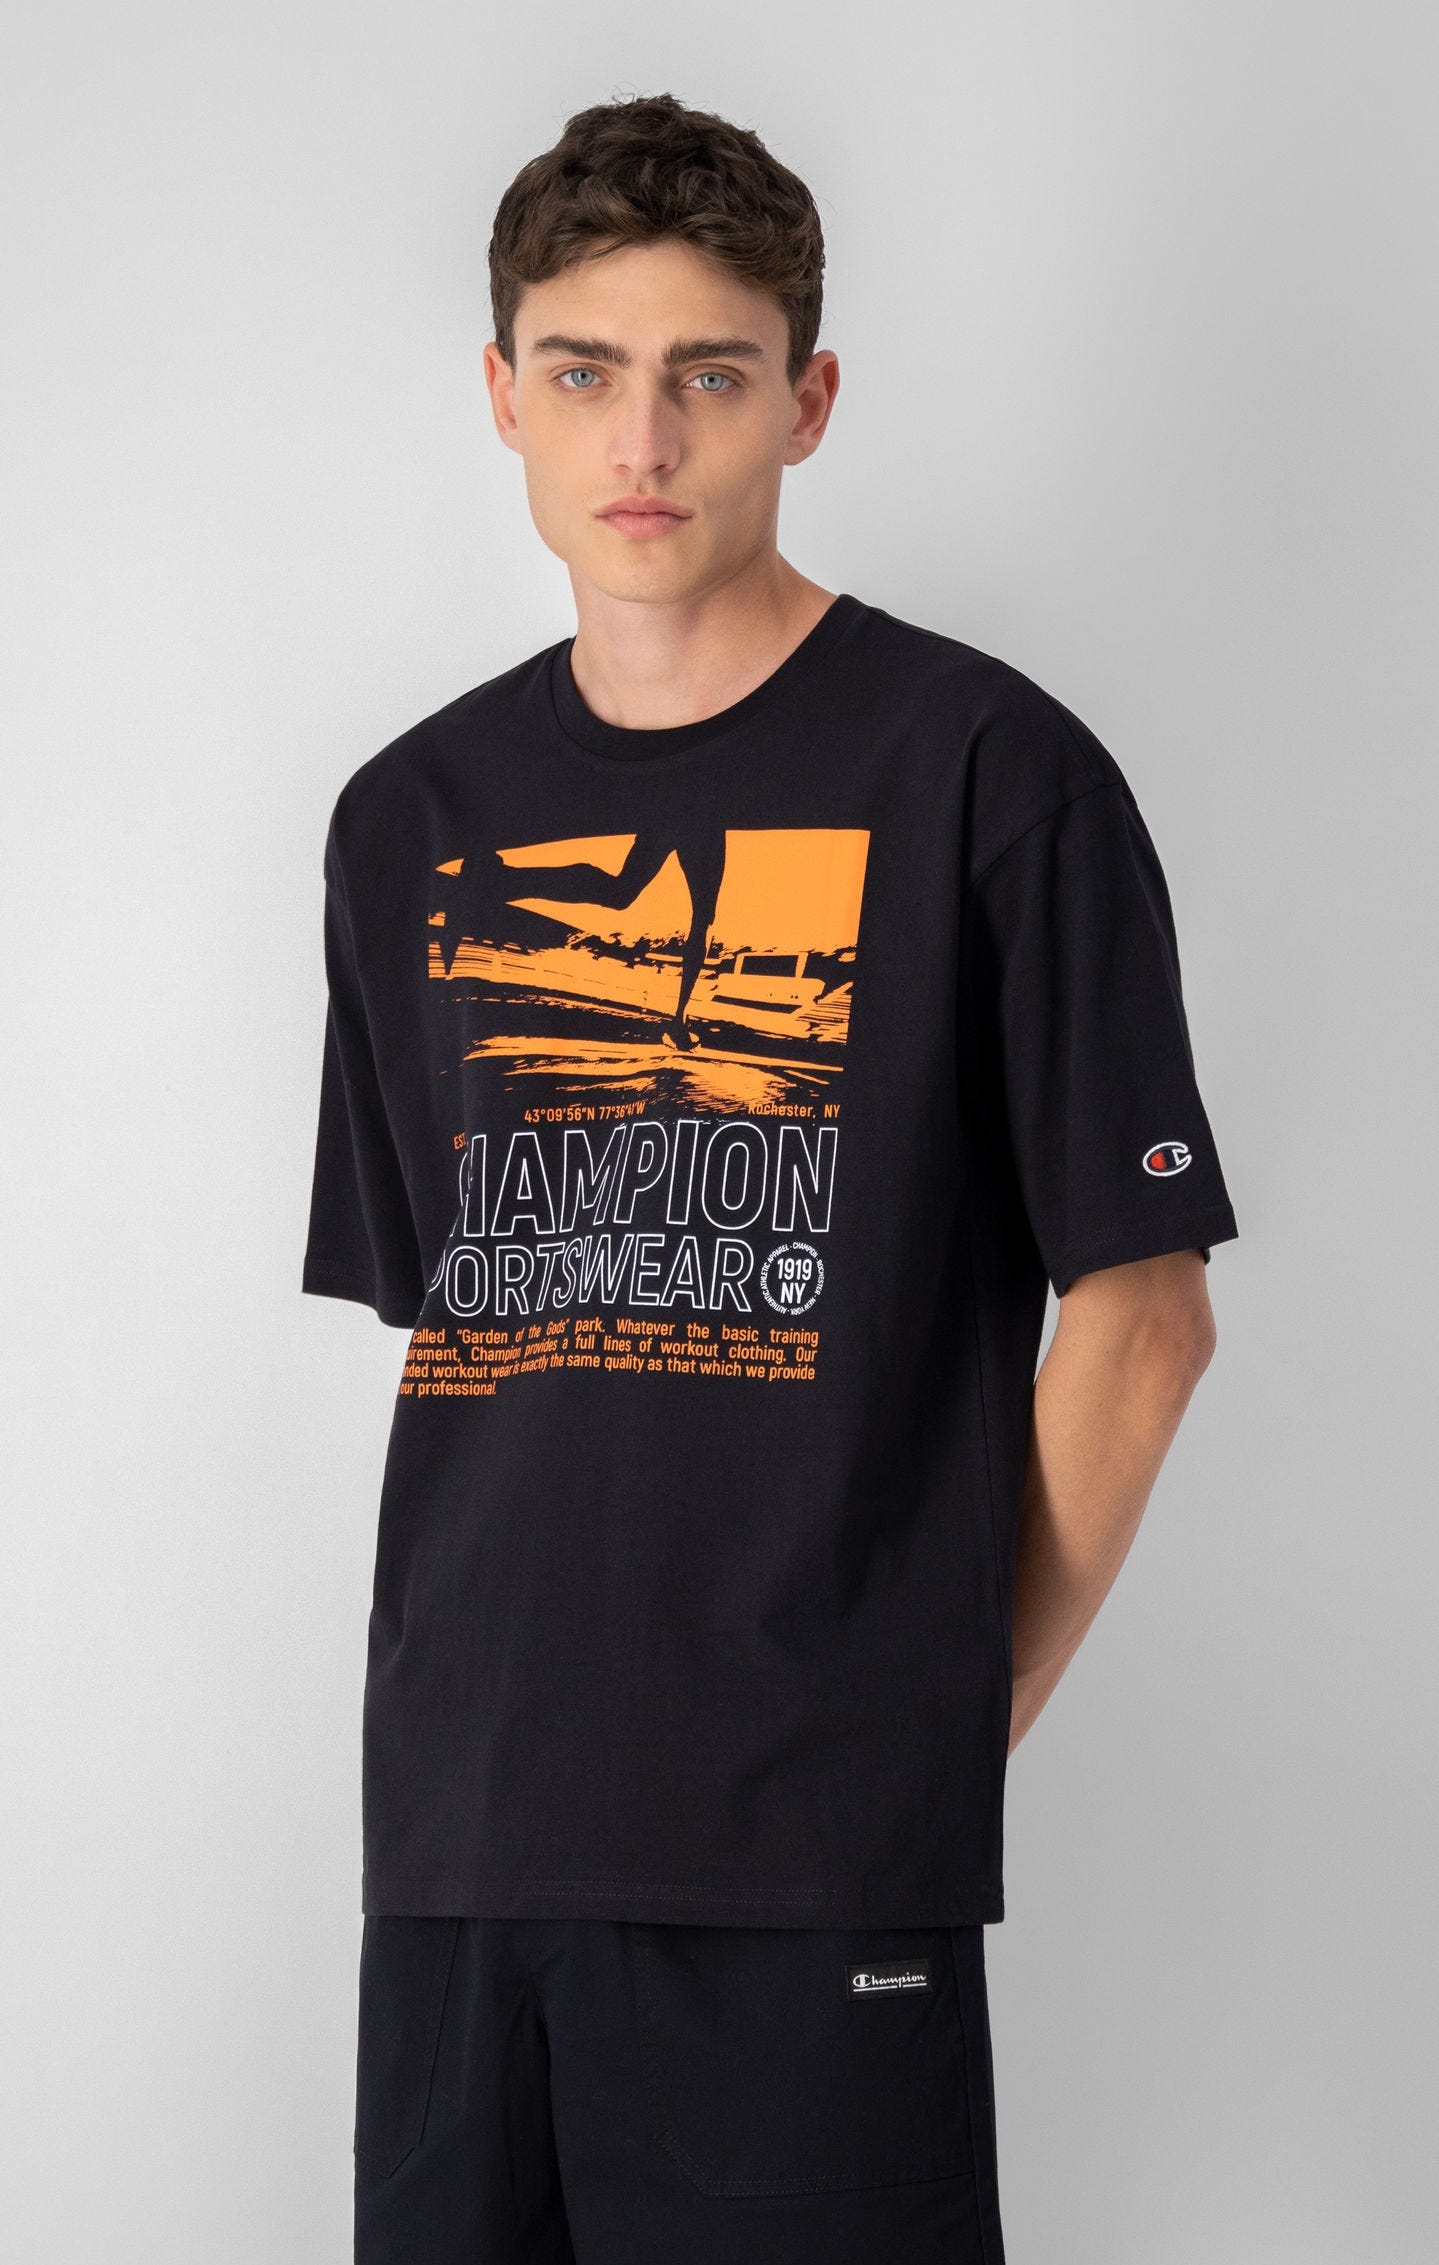 Space and Sport Powered T-Shirt